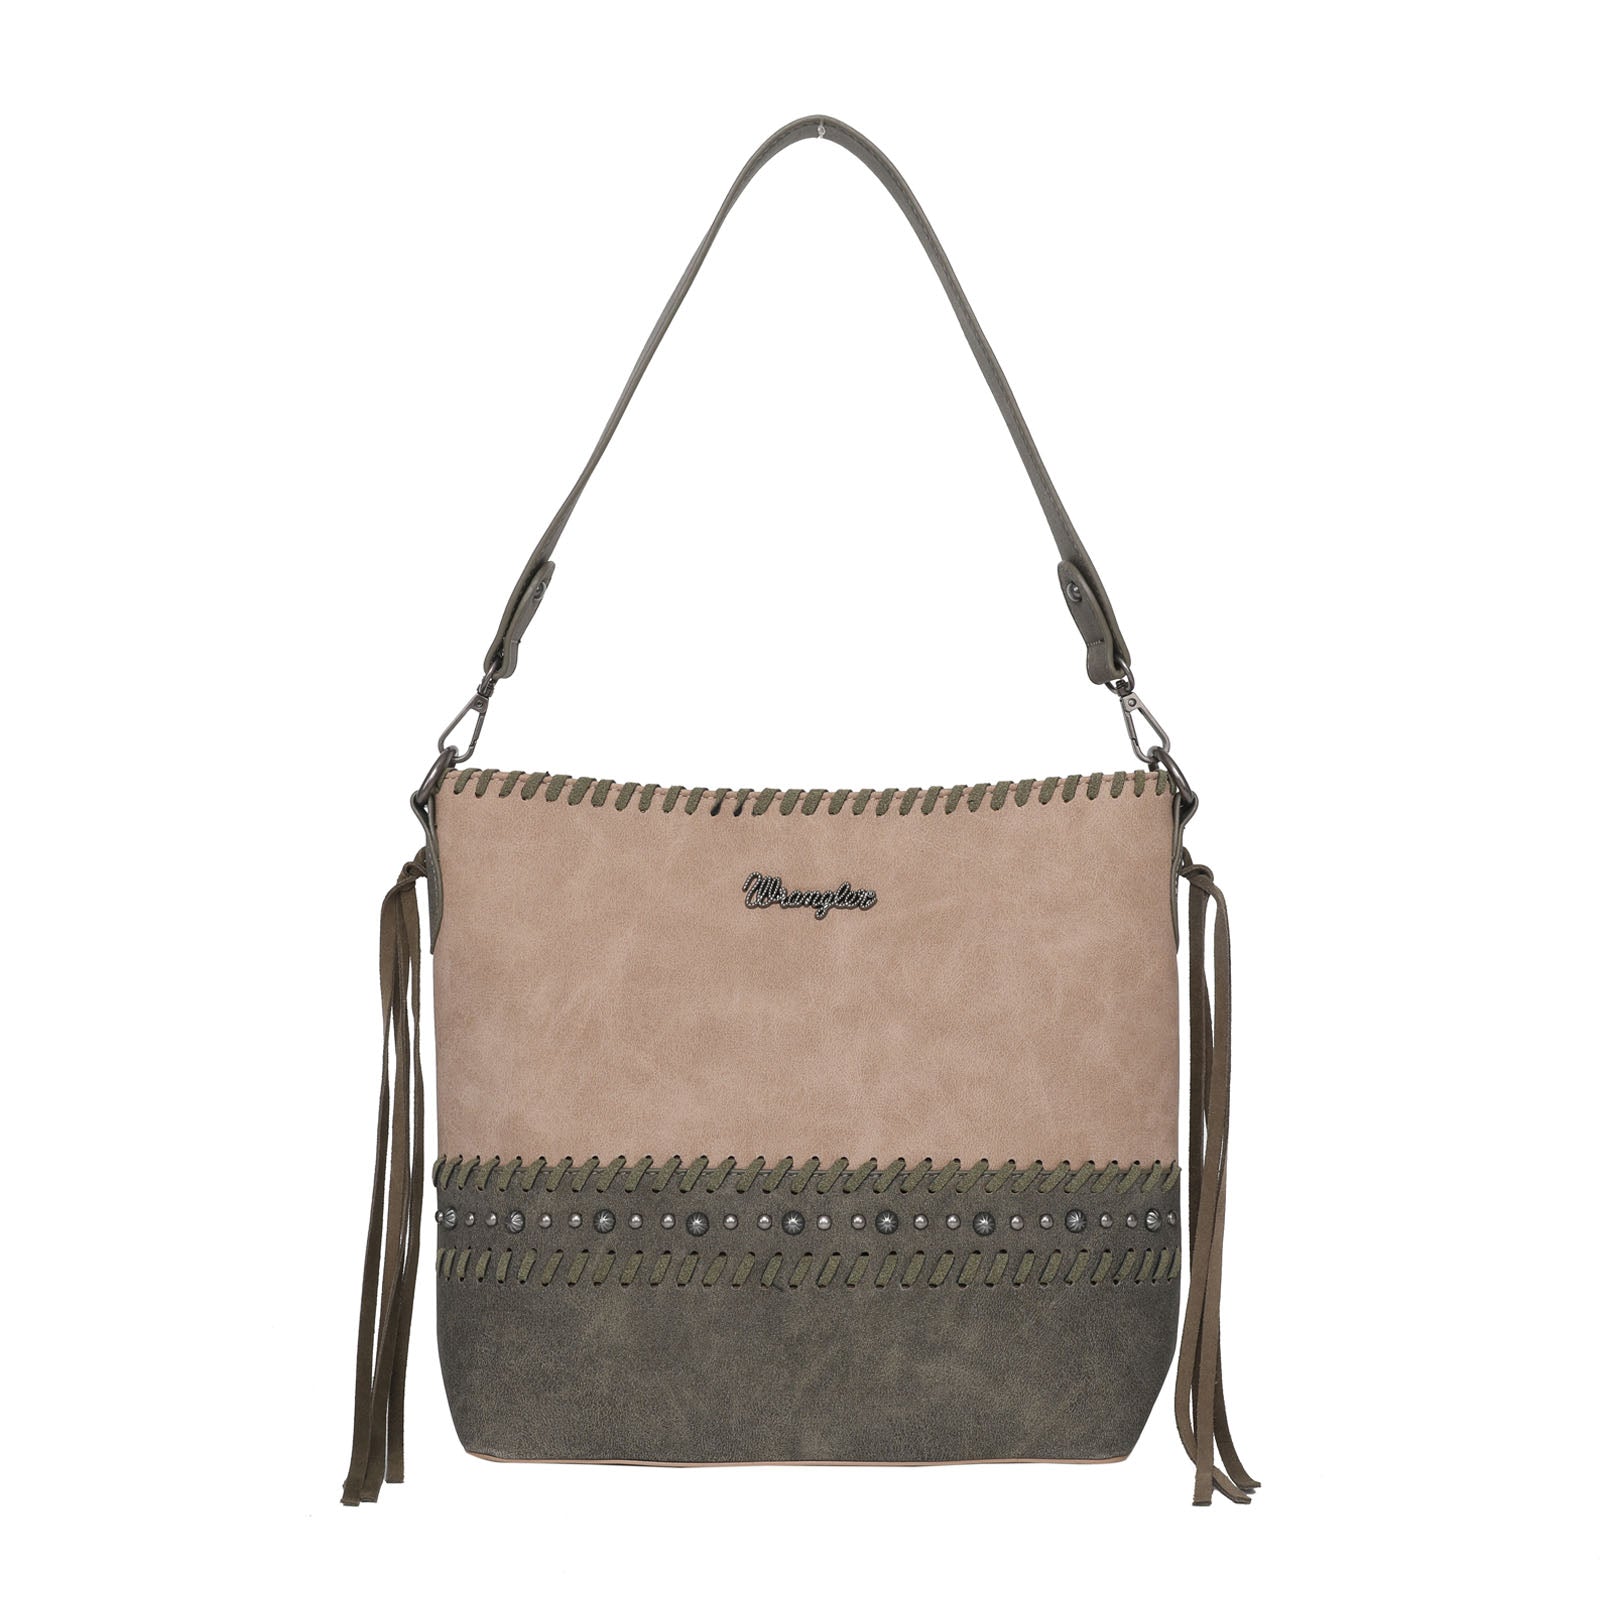 Wrangler Fringe and Studs Concealed Carry Hobo - Cowgirl Wear